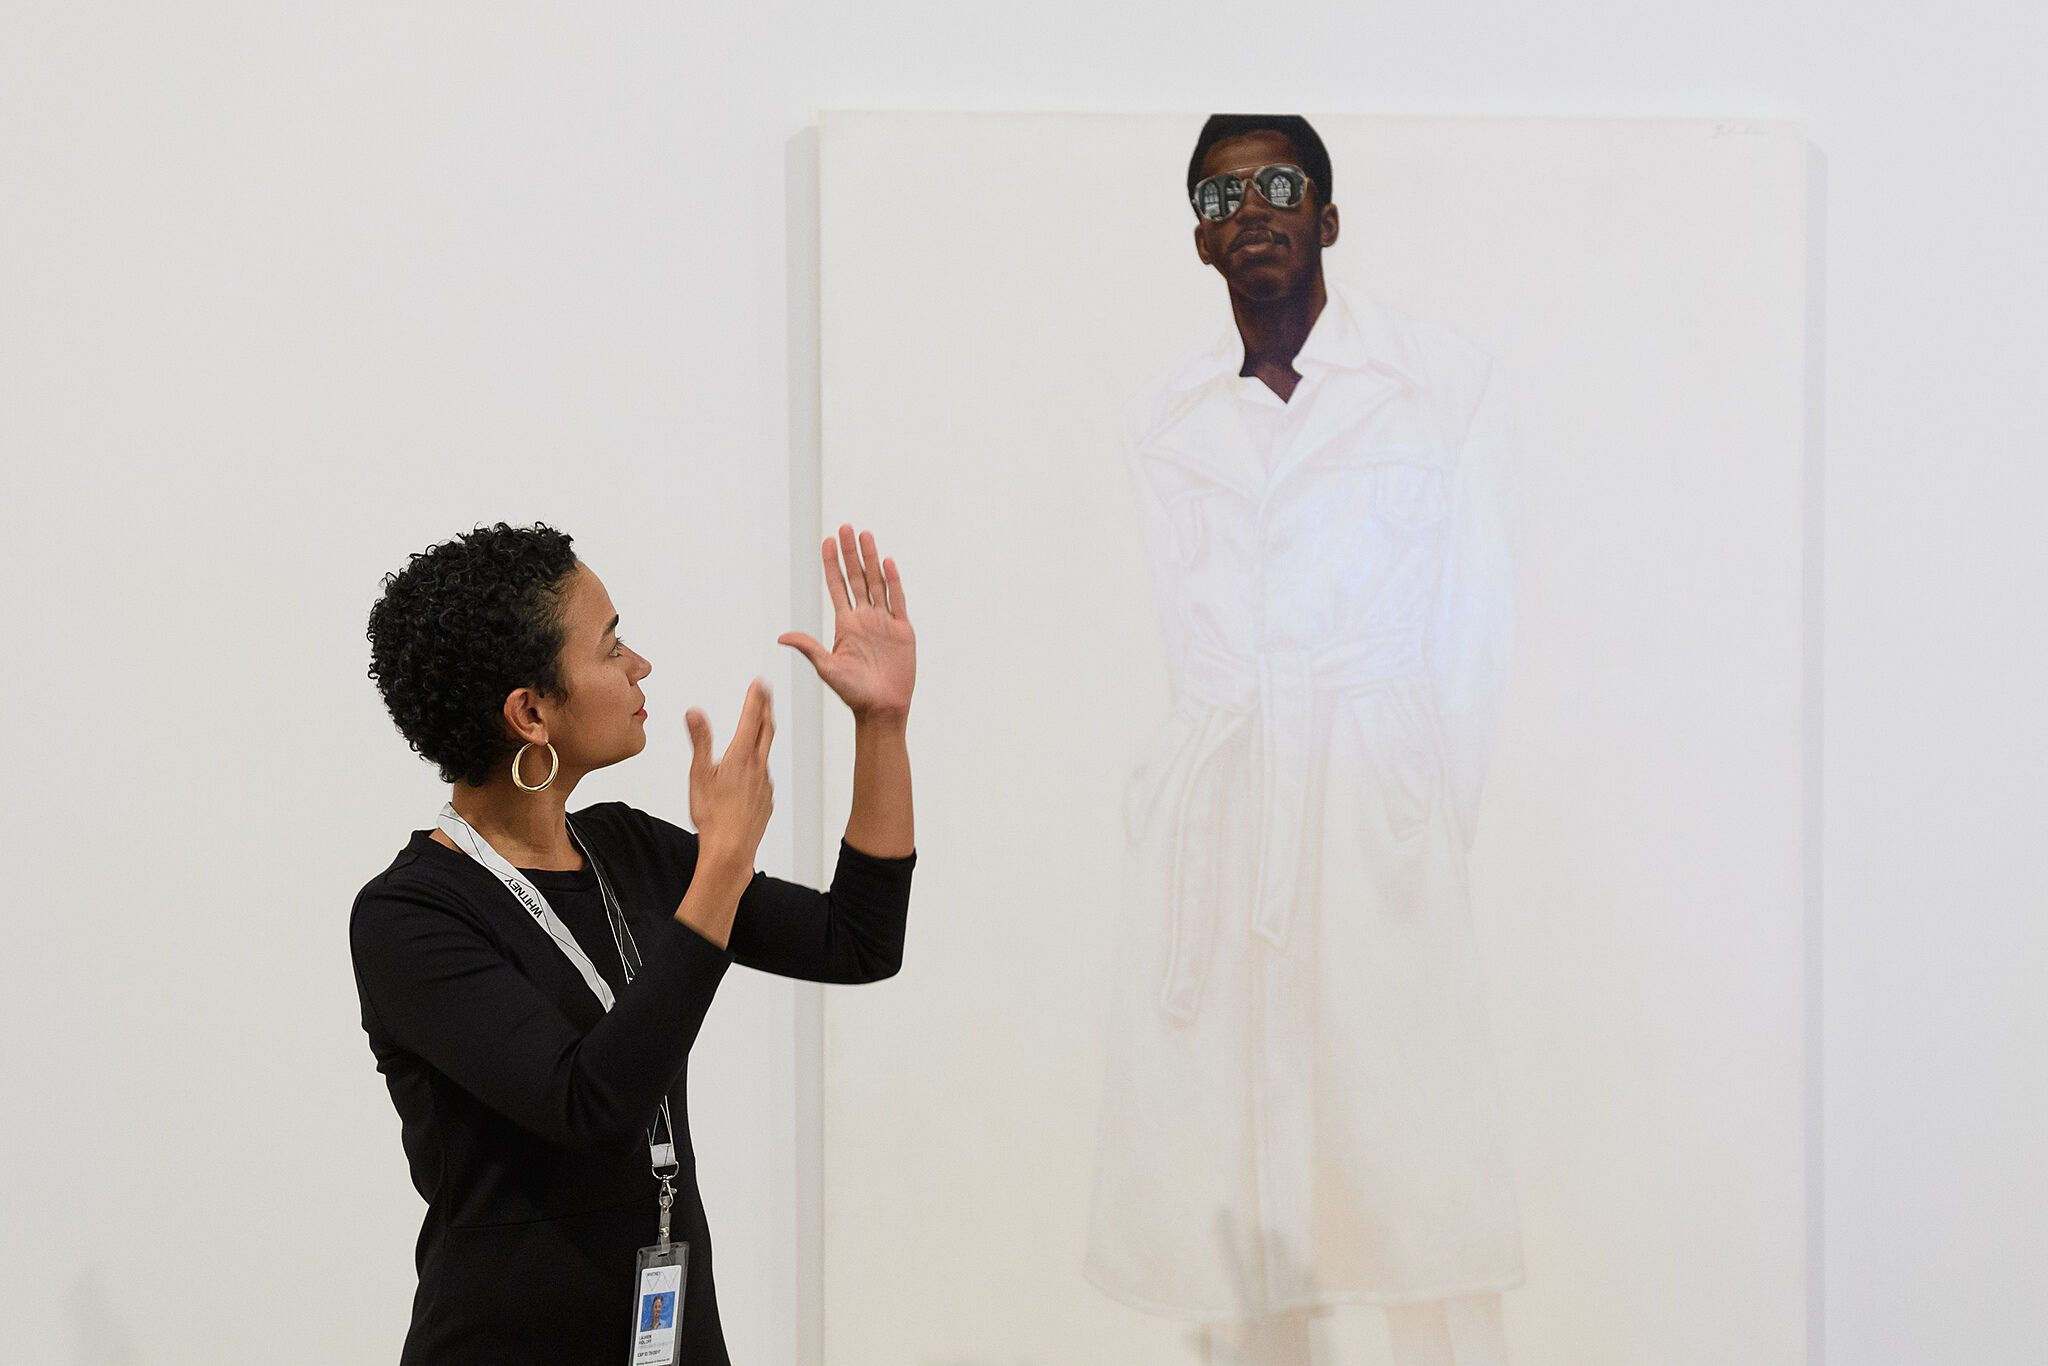 A photograph of a person signing in front of an artwork.